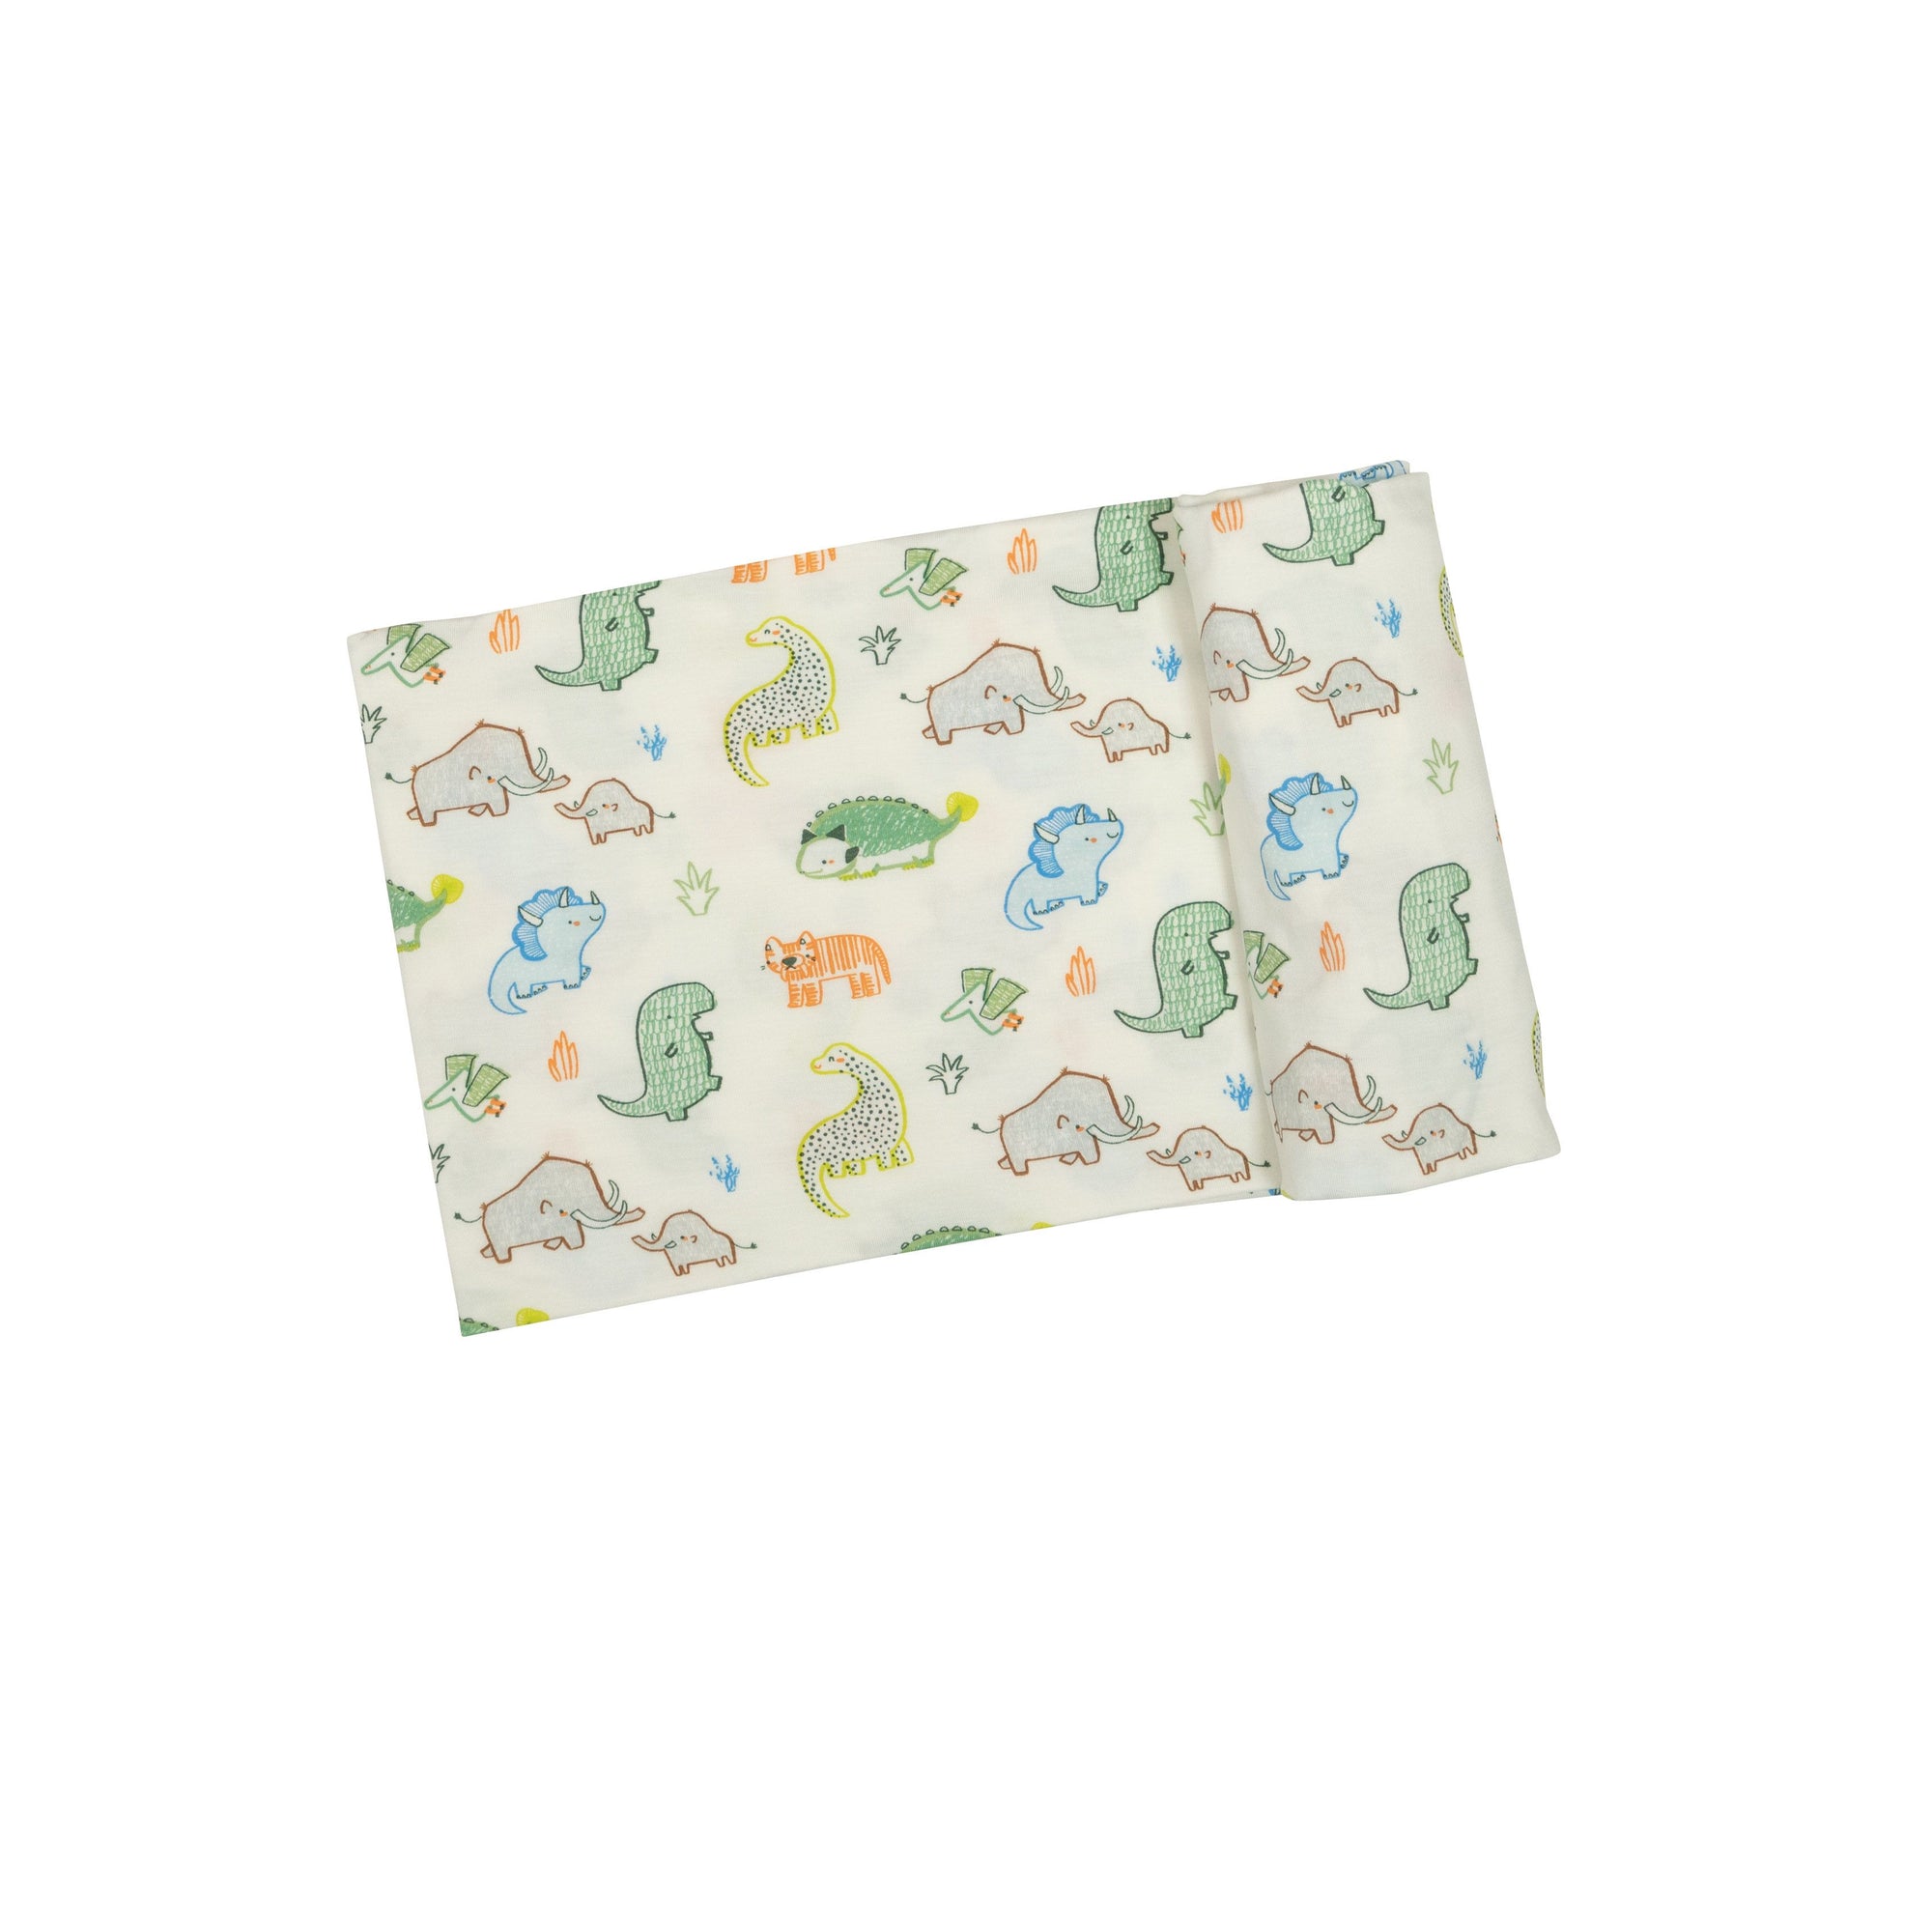 Sketchpad Dinos Bamboo Swaddle Blanket